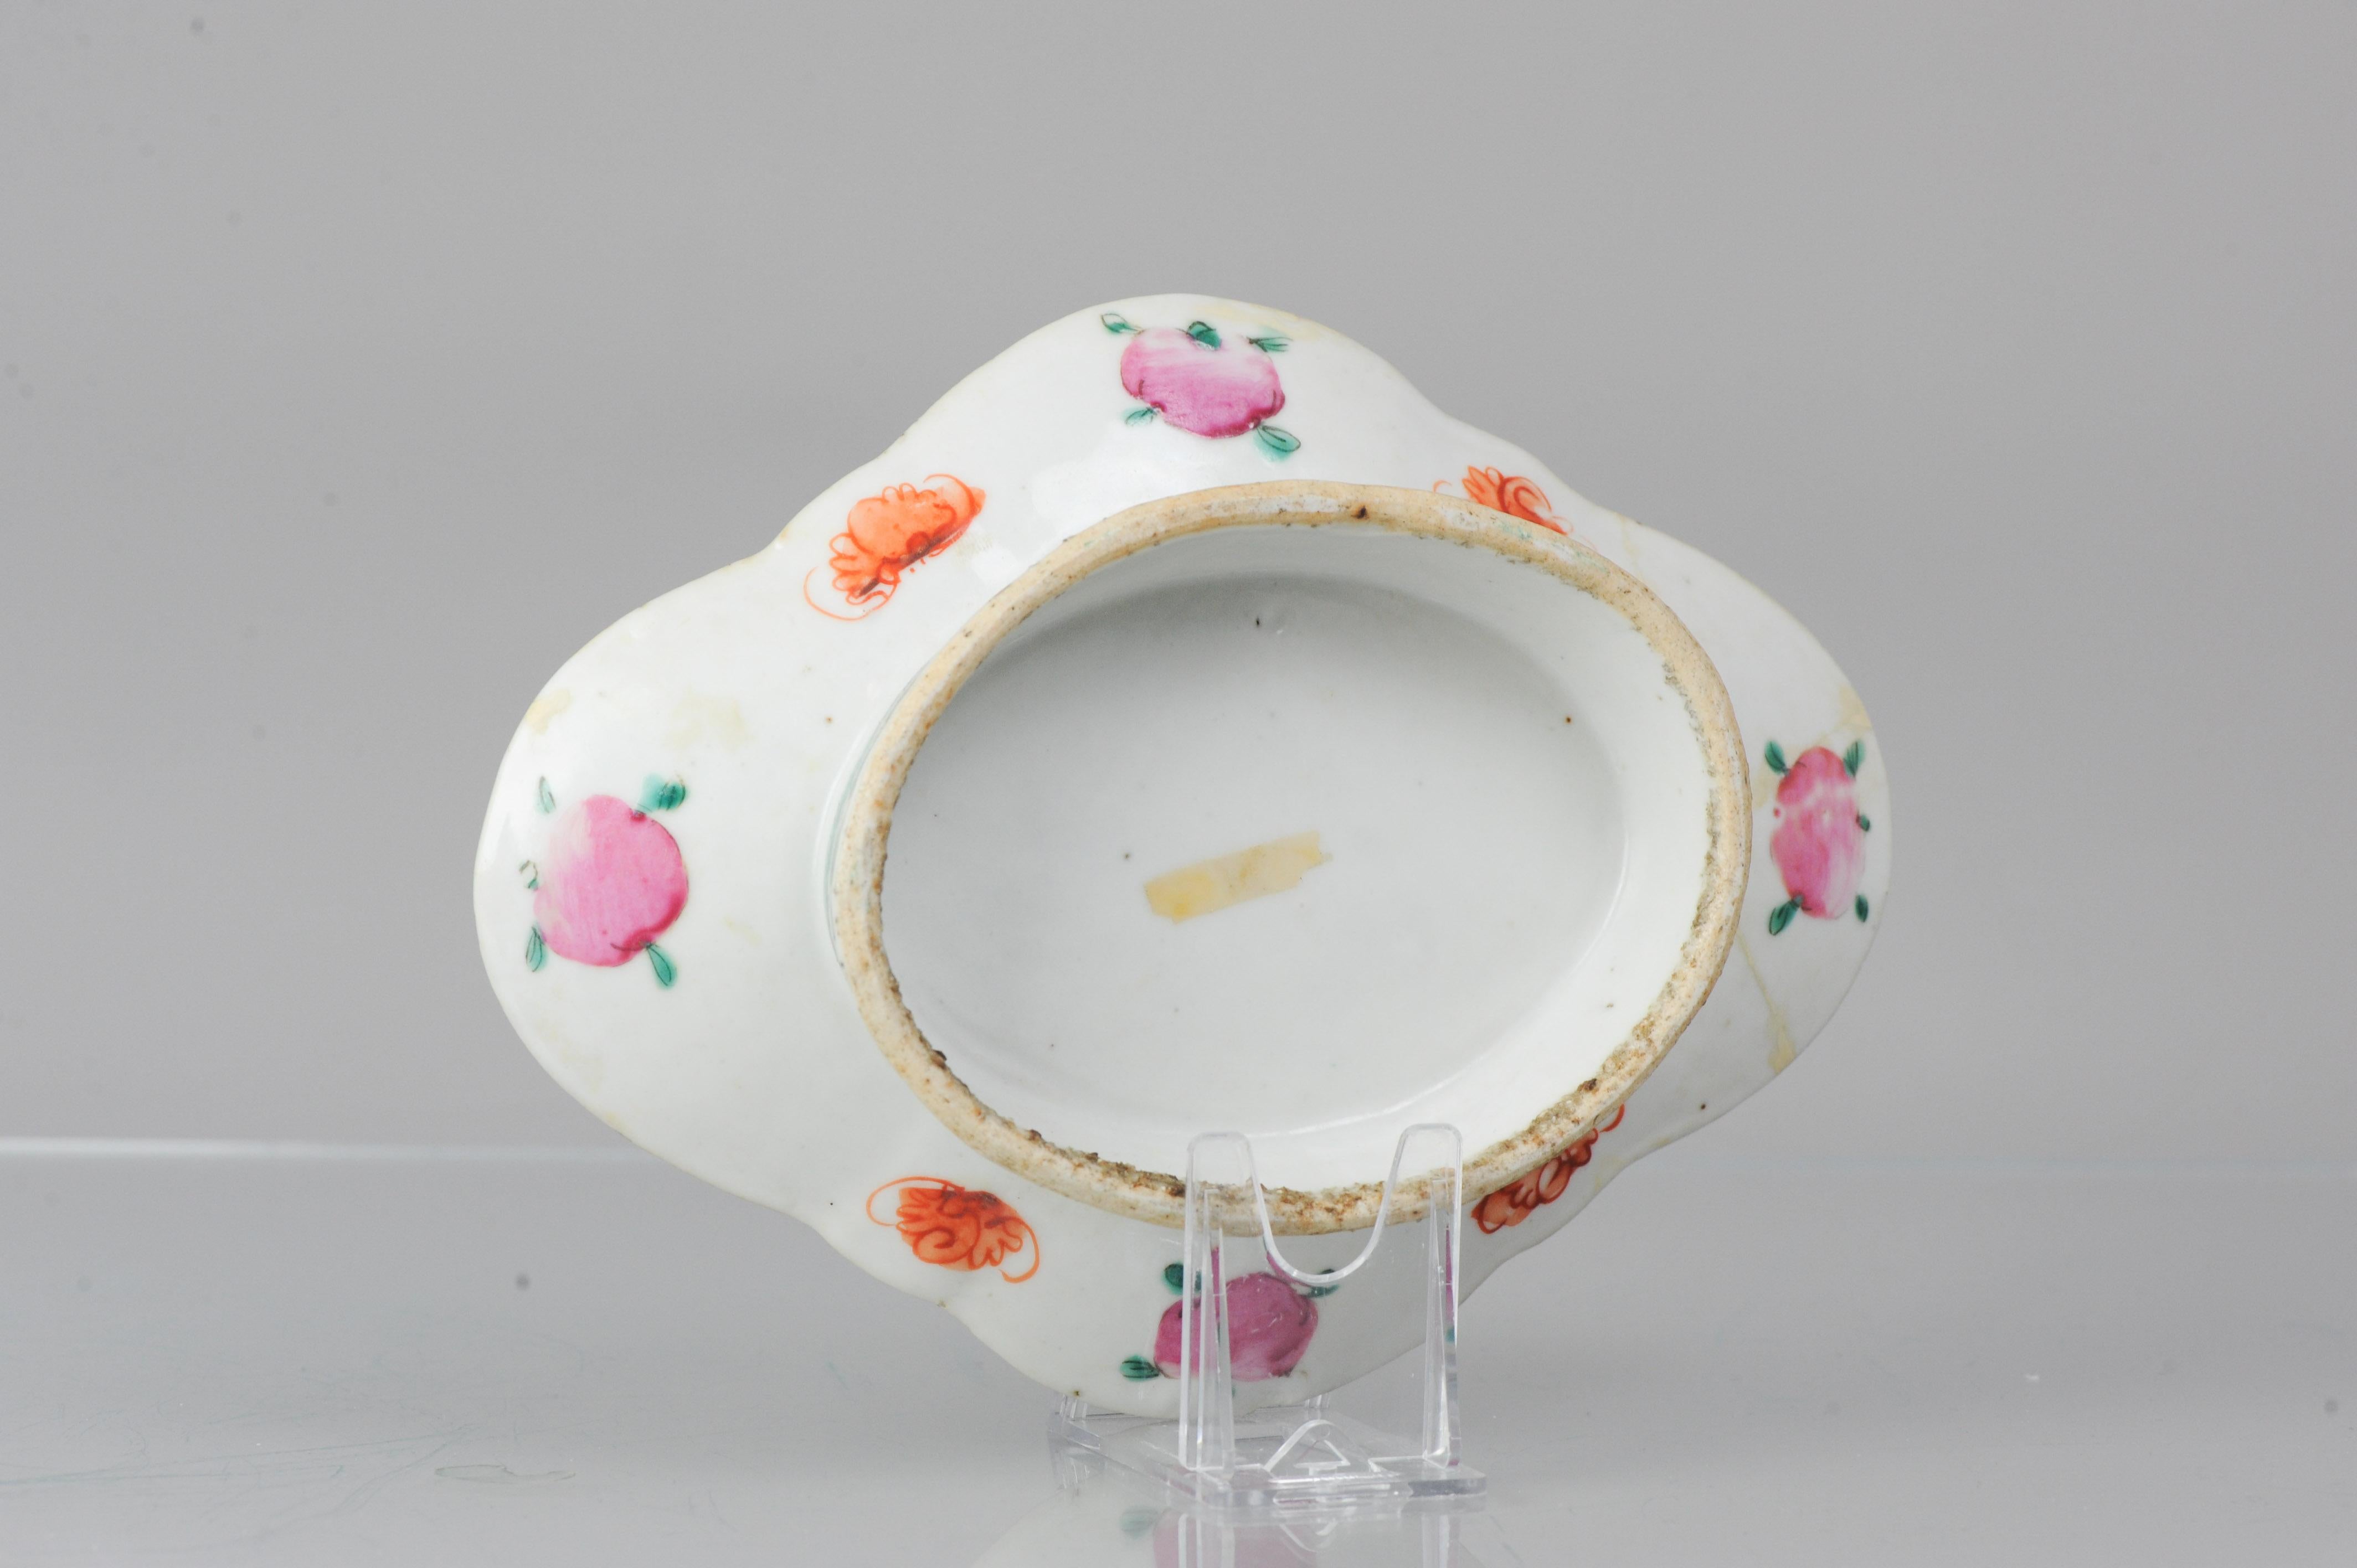 A high quality polychrome/famille rose bowl/altar dish from the 19th century. Delicate piece with unusual scene of a lotus pond

Additional information:
Material: Porcelain & Pottery
Type: Altar Dish
Region of Origin: China
Period: 19th century Qing